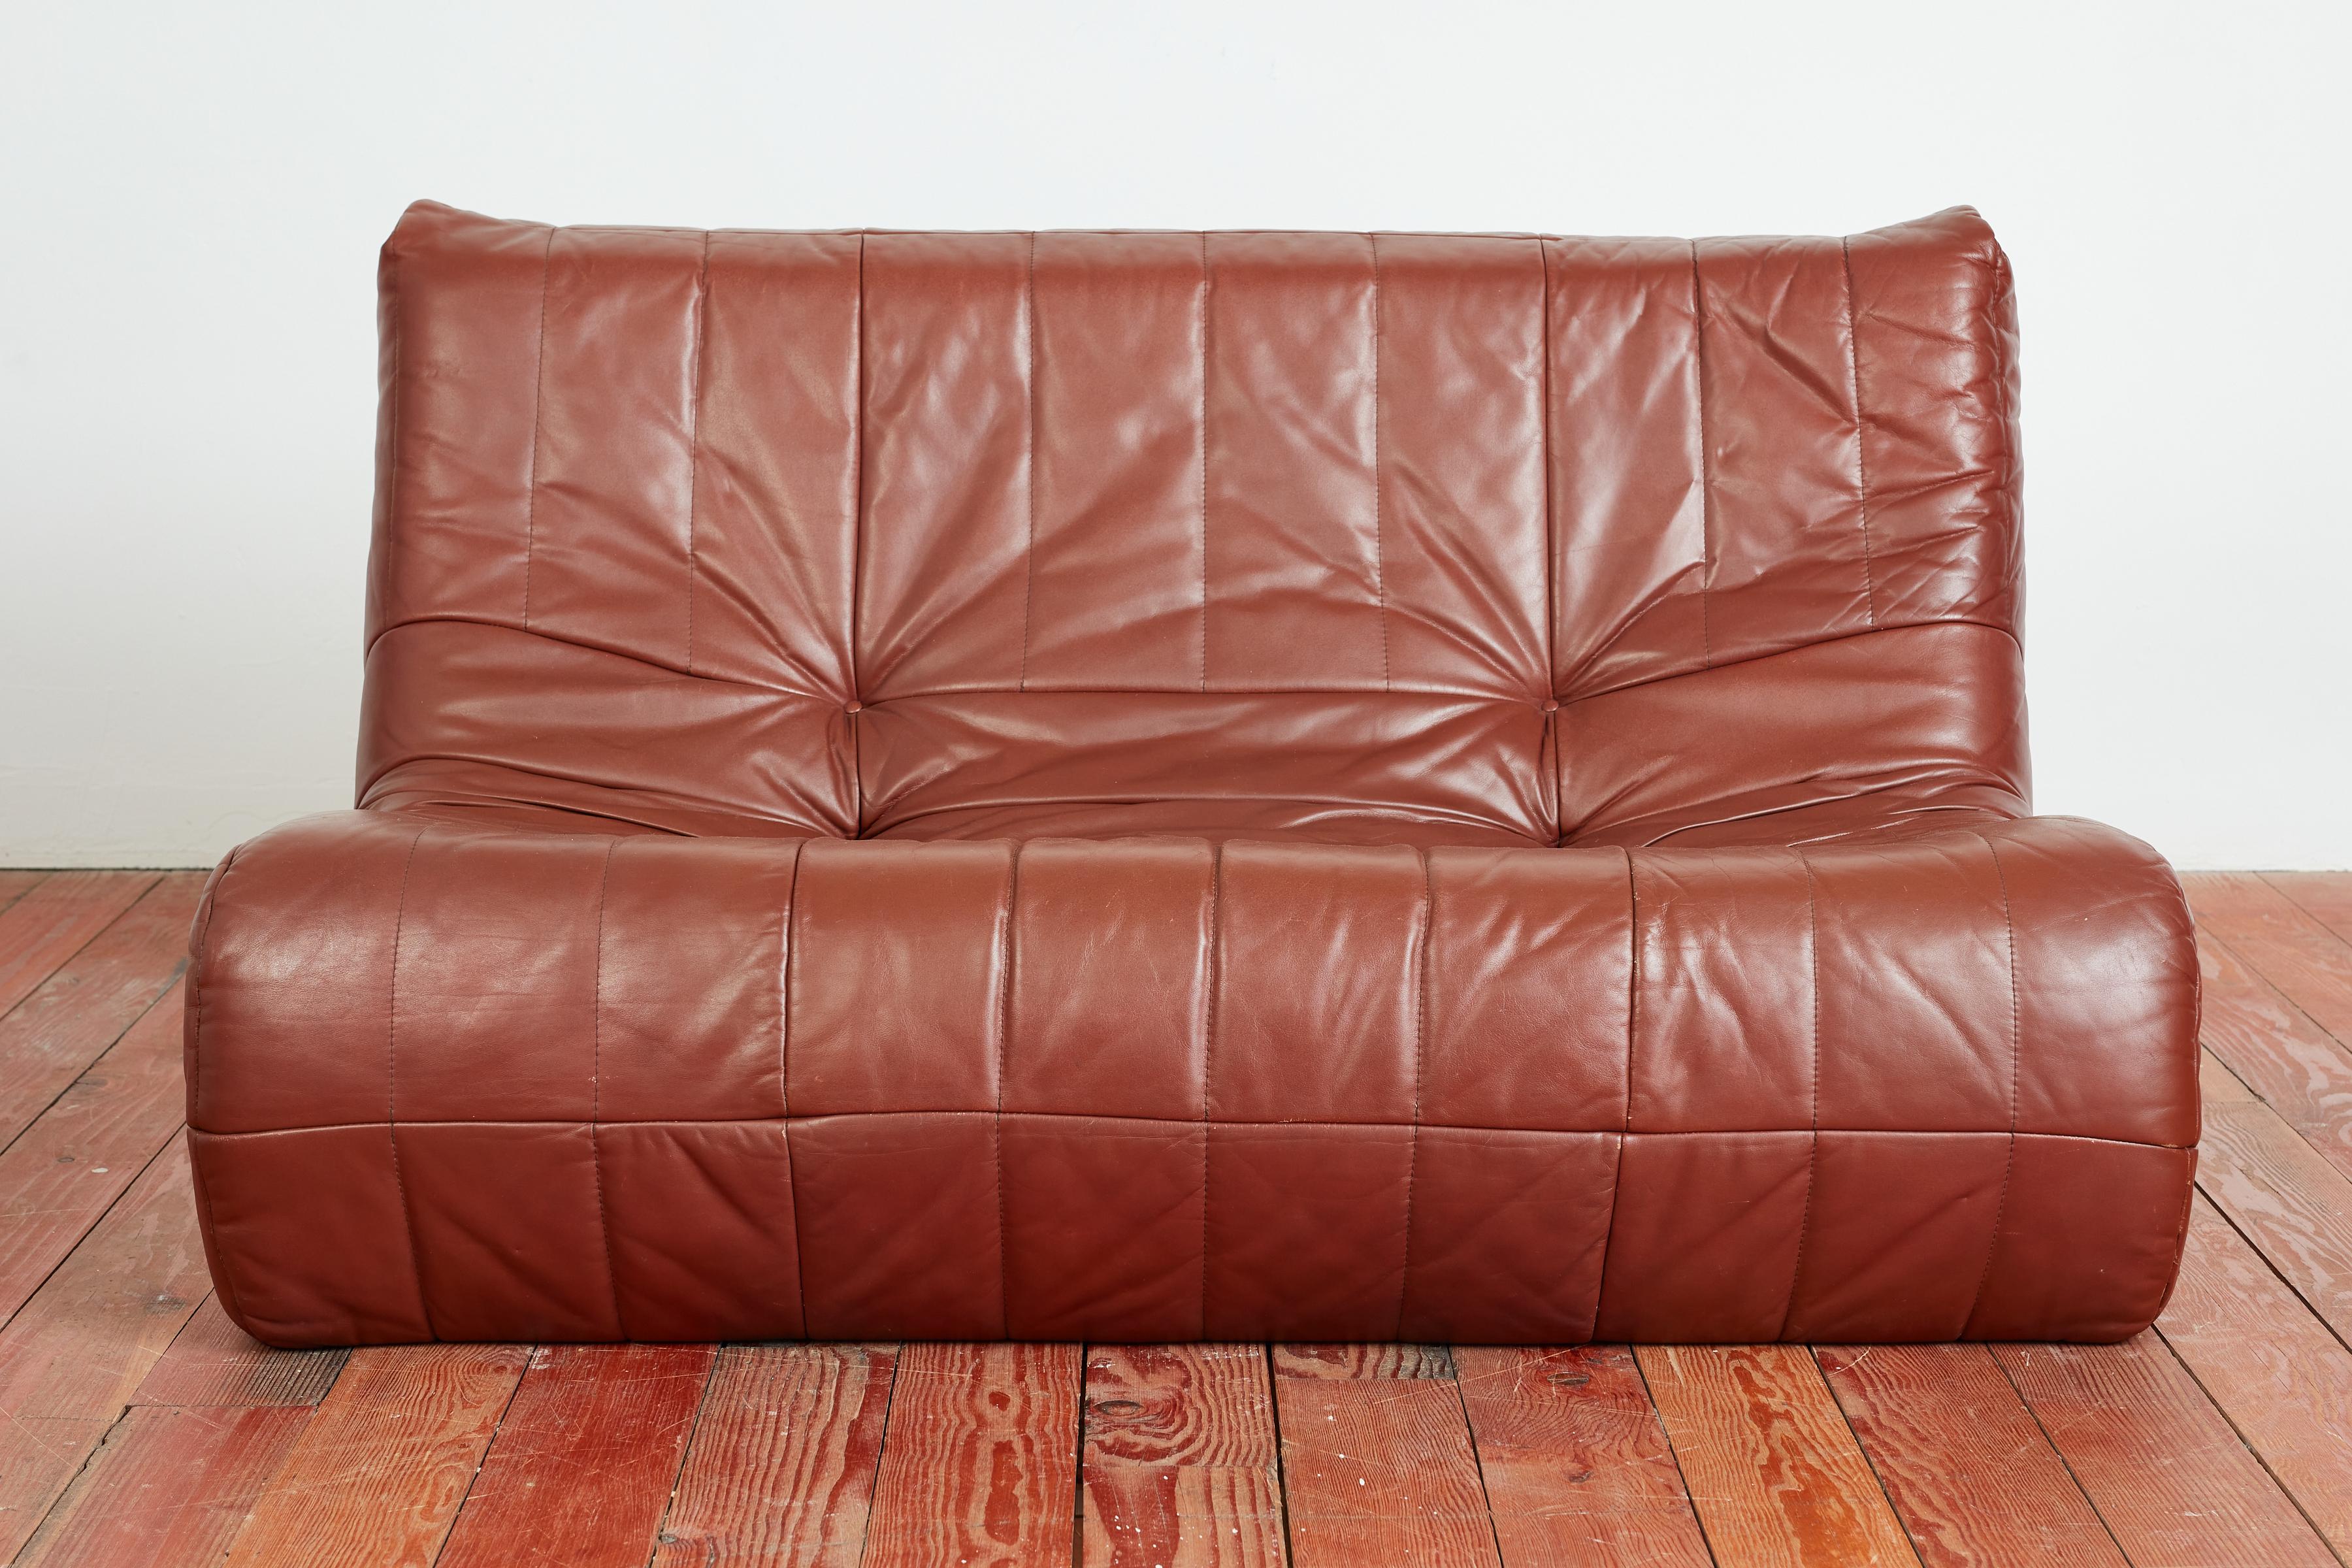 1970's Italian leather settee in the style of a TOGO- with foam core and wrapped with cognac colored leather with vertical stitching. 
Italy, 1970's

Matching sofa available 